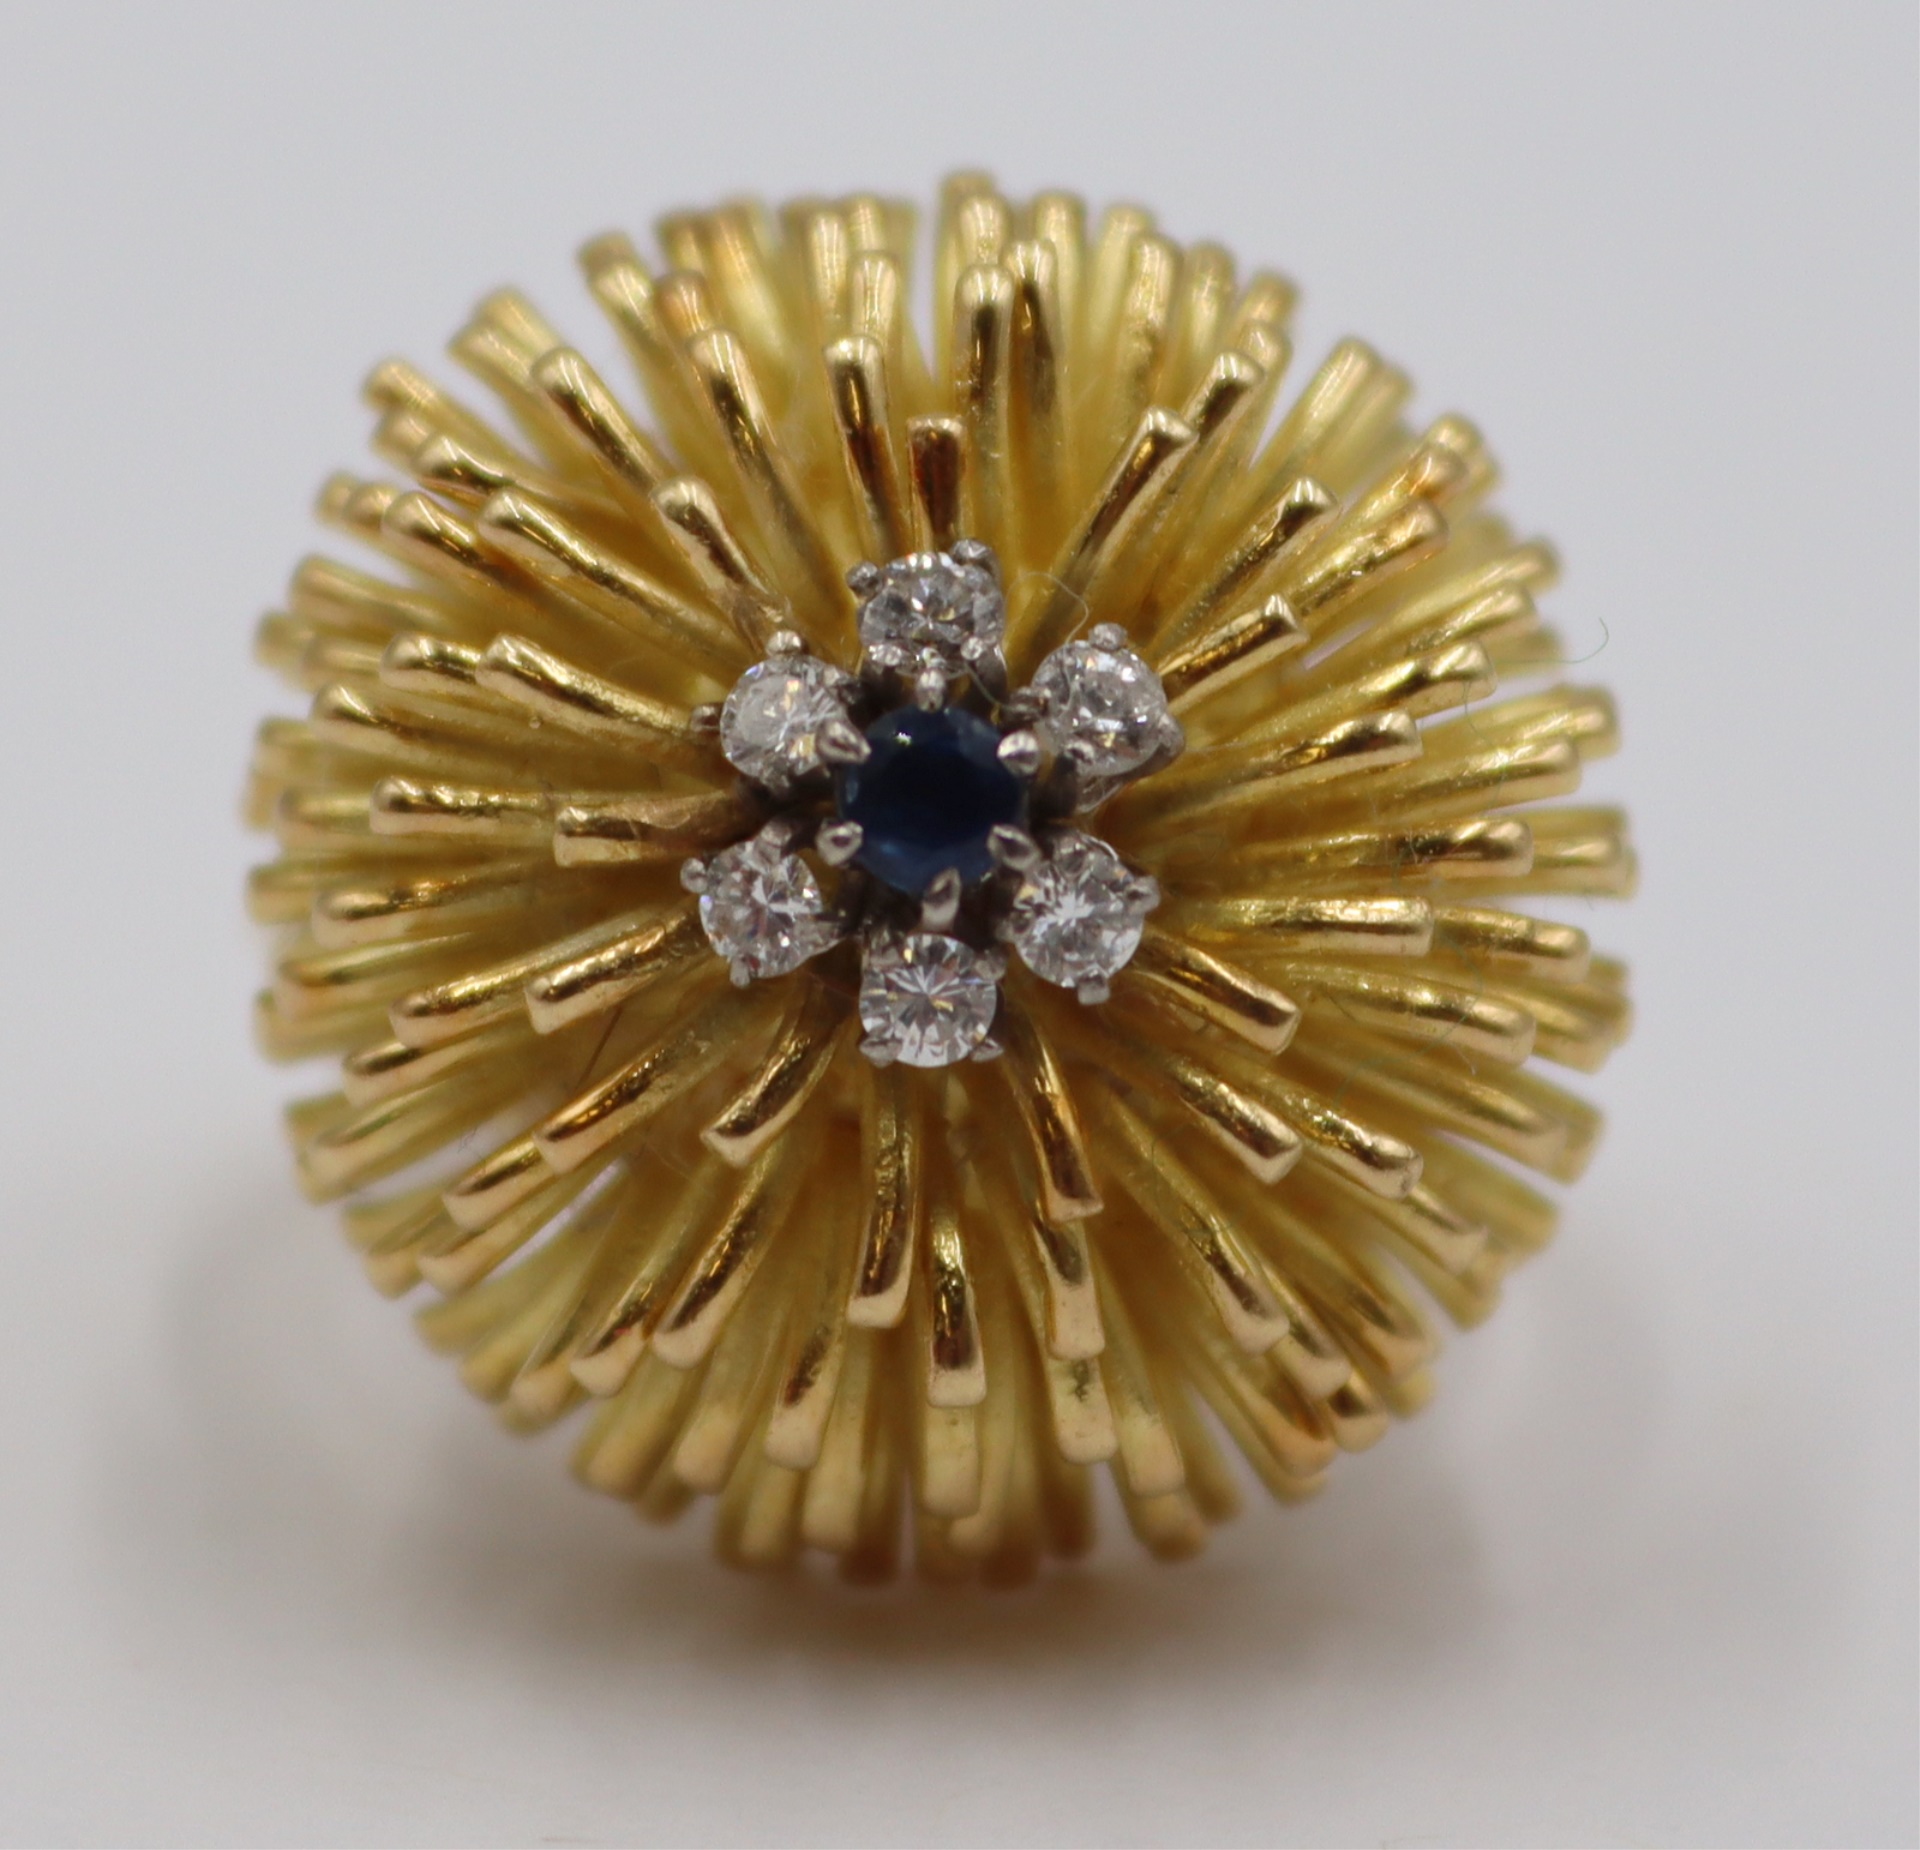 JEWELRY. 18KT GOLD, SAPPHIRE AND